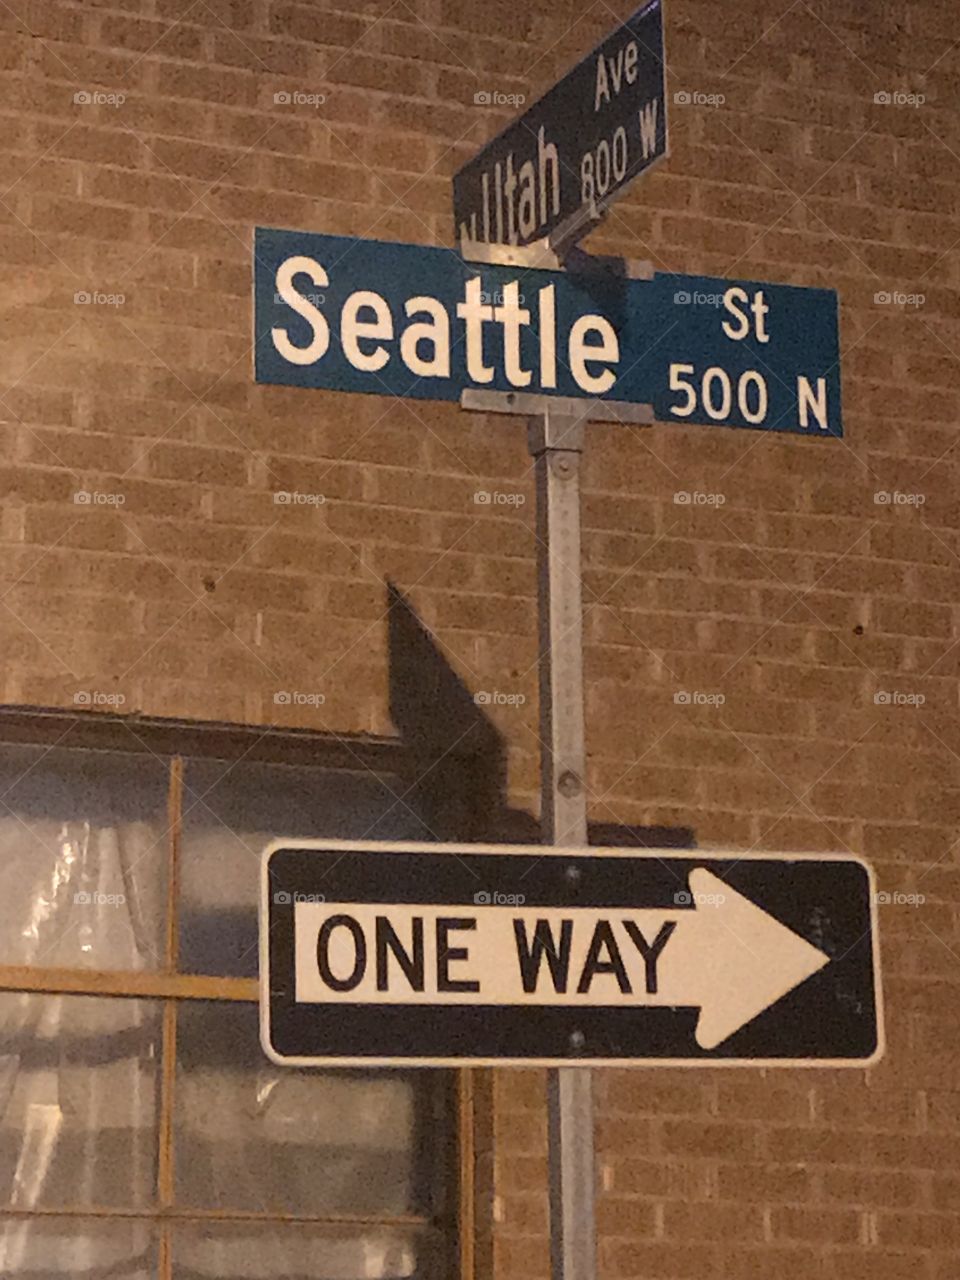 At a crossroads, an obvious street sign points to the direction to go. To the great northwest